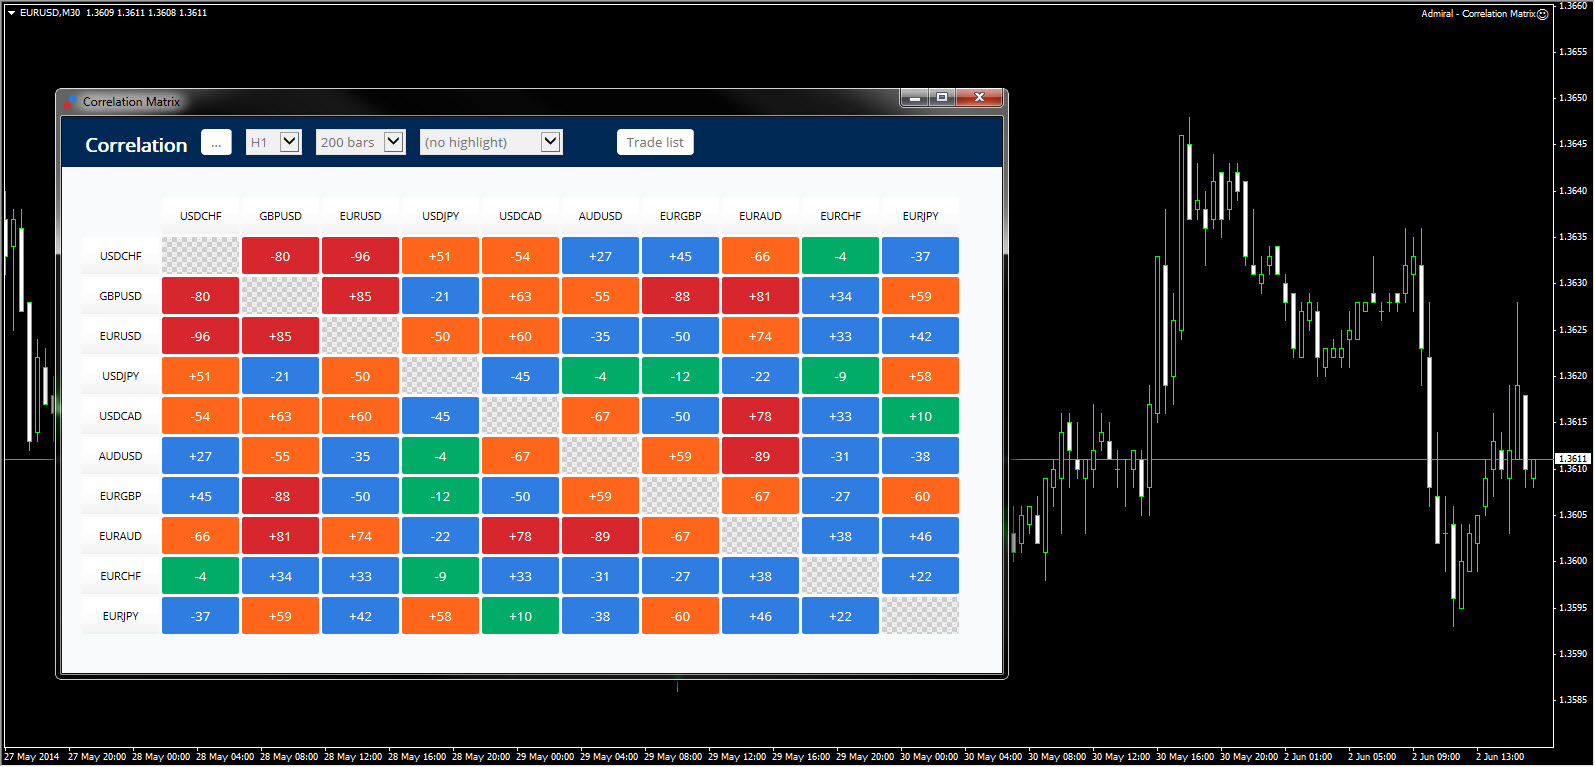 The Currency Correlation tool